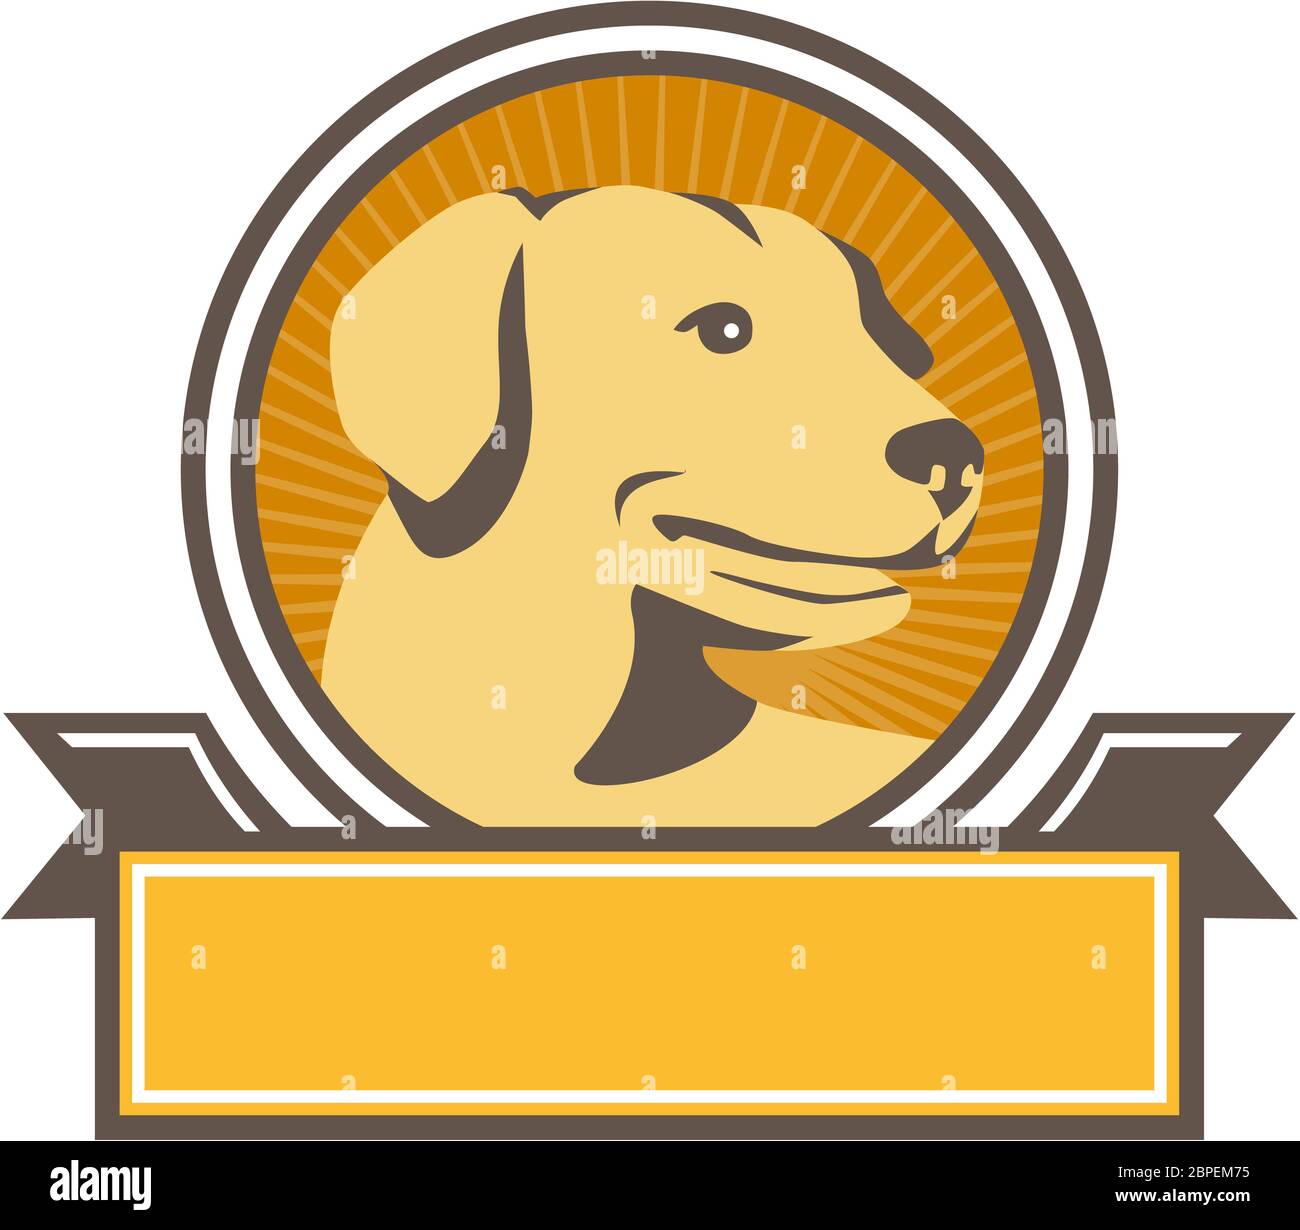 Illustration of a yellow labrador golden retriever dog head looking to the side viewed from front set inside circle with sunburst in the background do Stock Photo